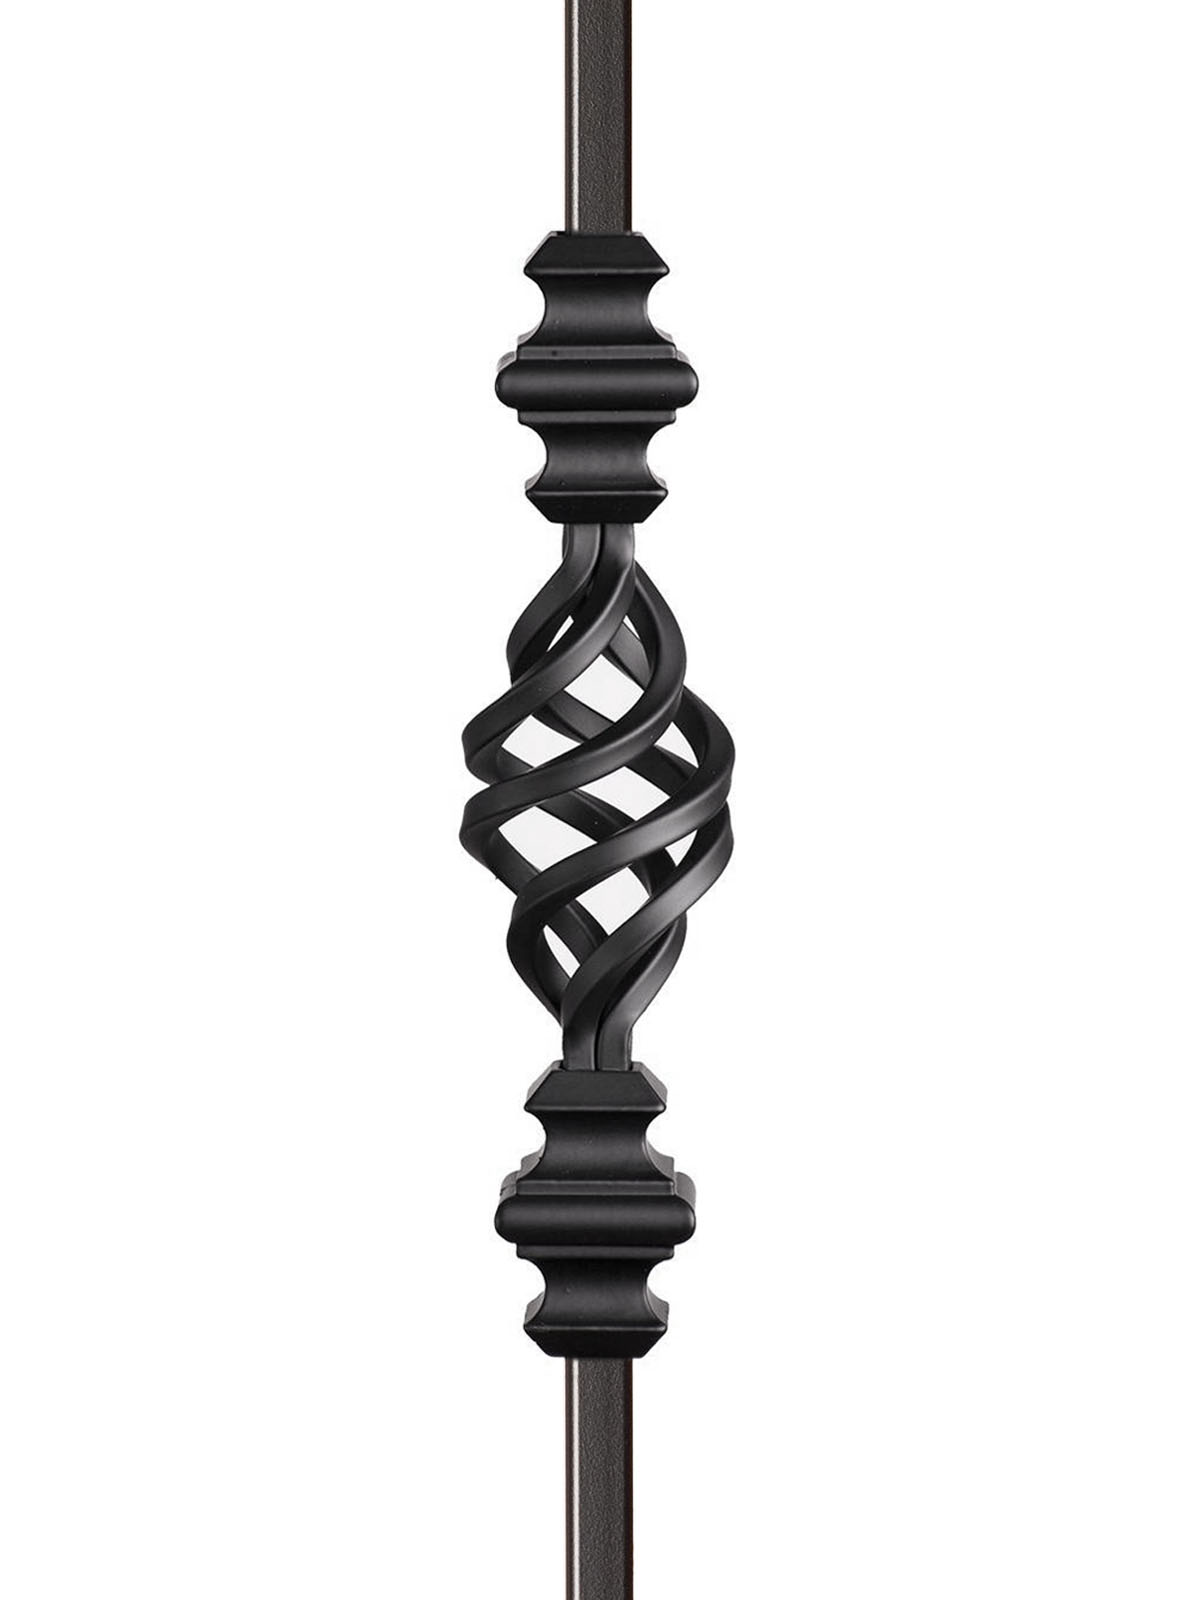 Iron Baluster 9077 - 1/2" Square - Single Basket w/ Knuckles